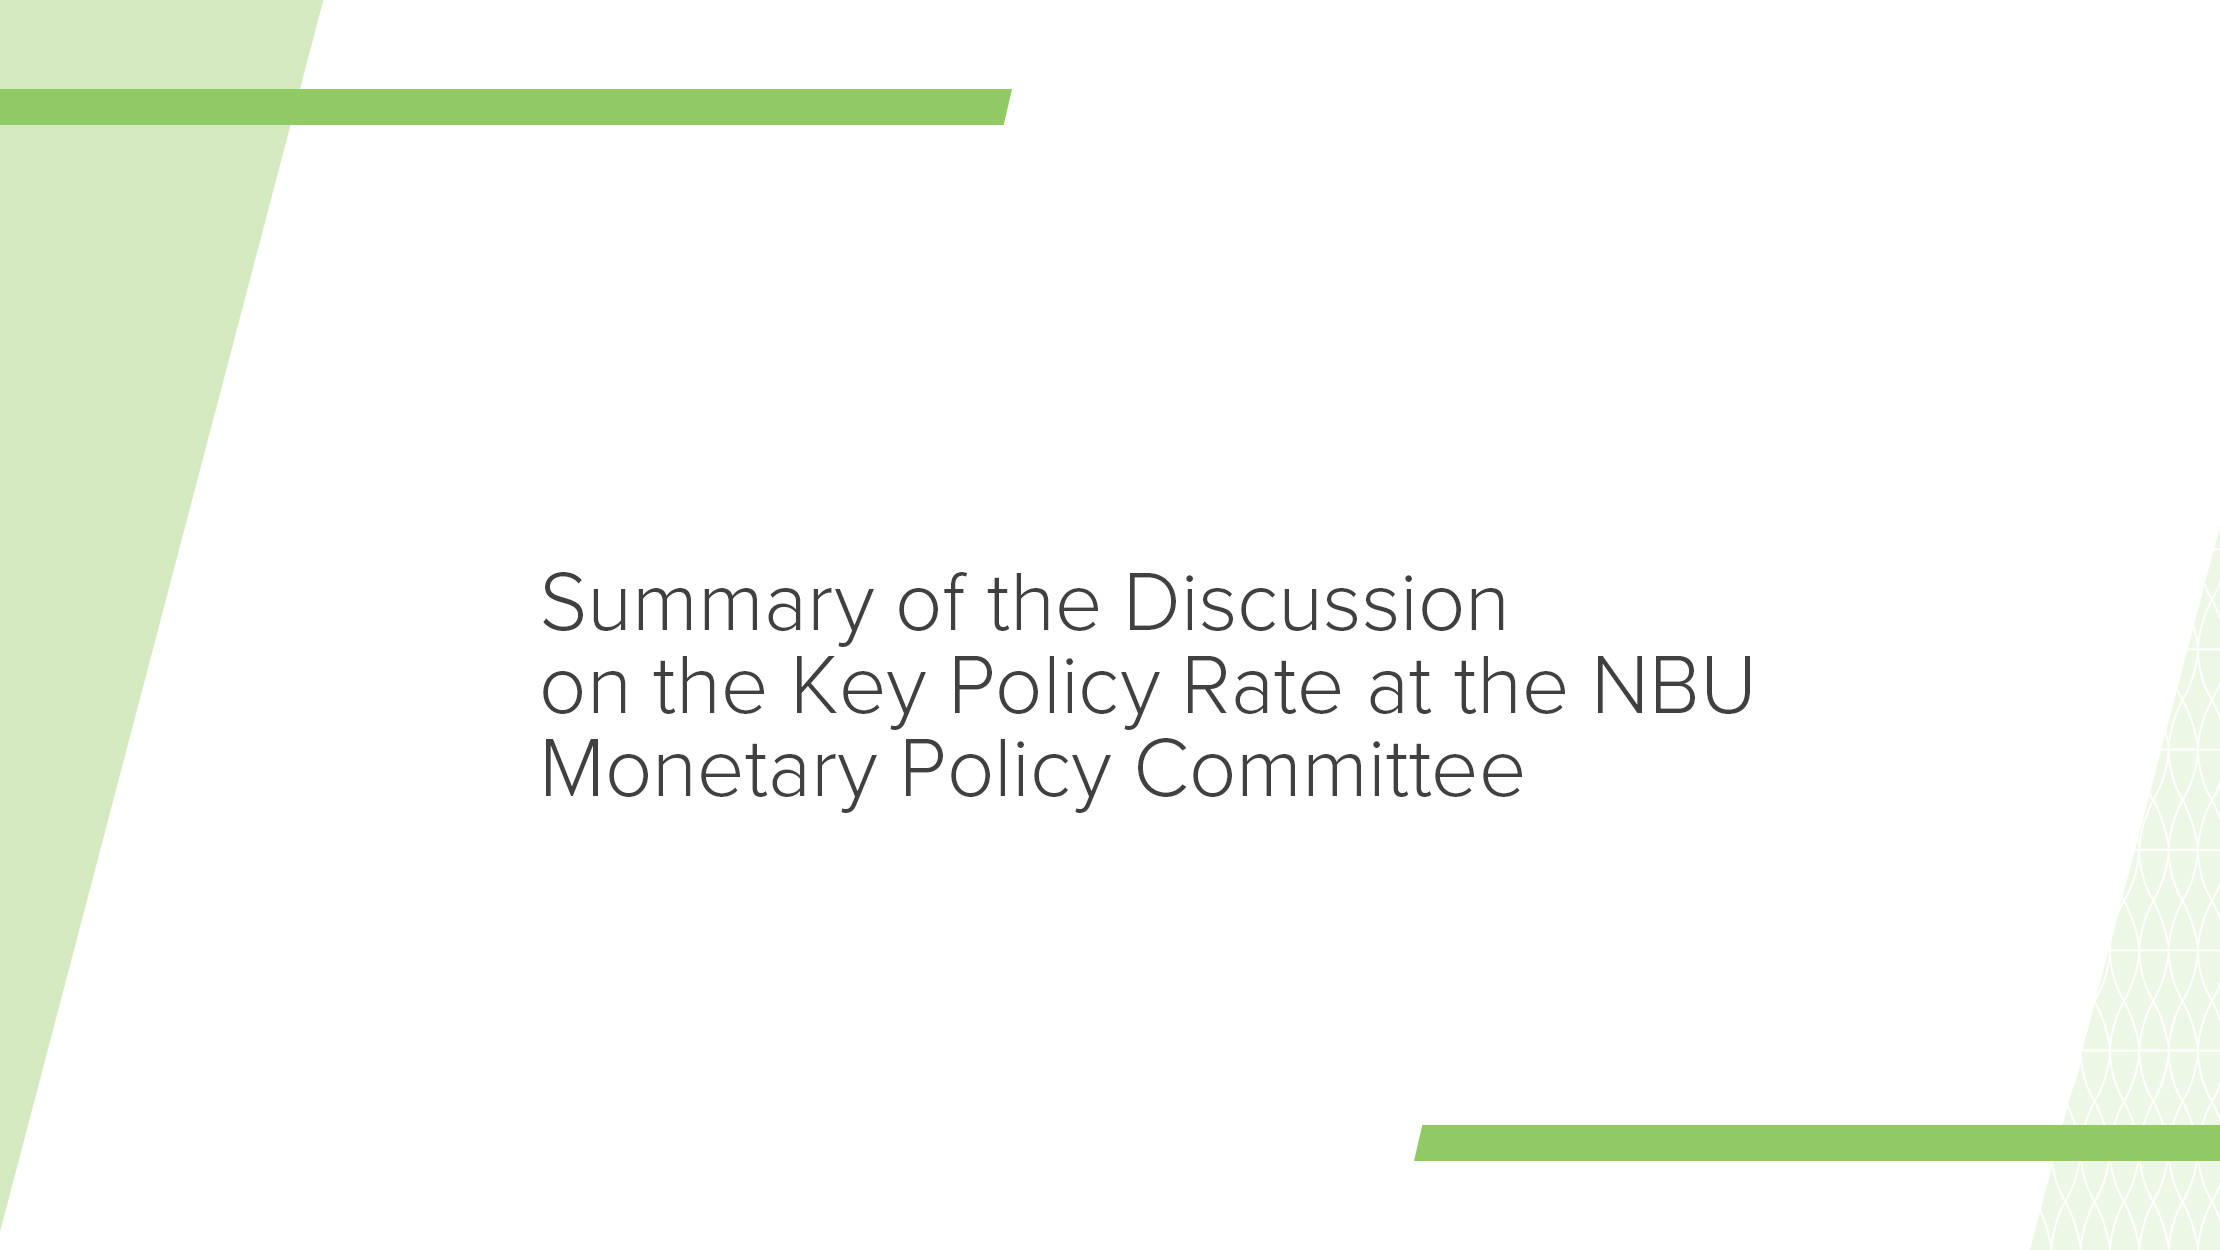 Summary of a Key Policy Rate Discussion by the NBU Monetary Policy Committee